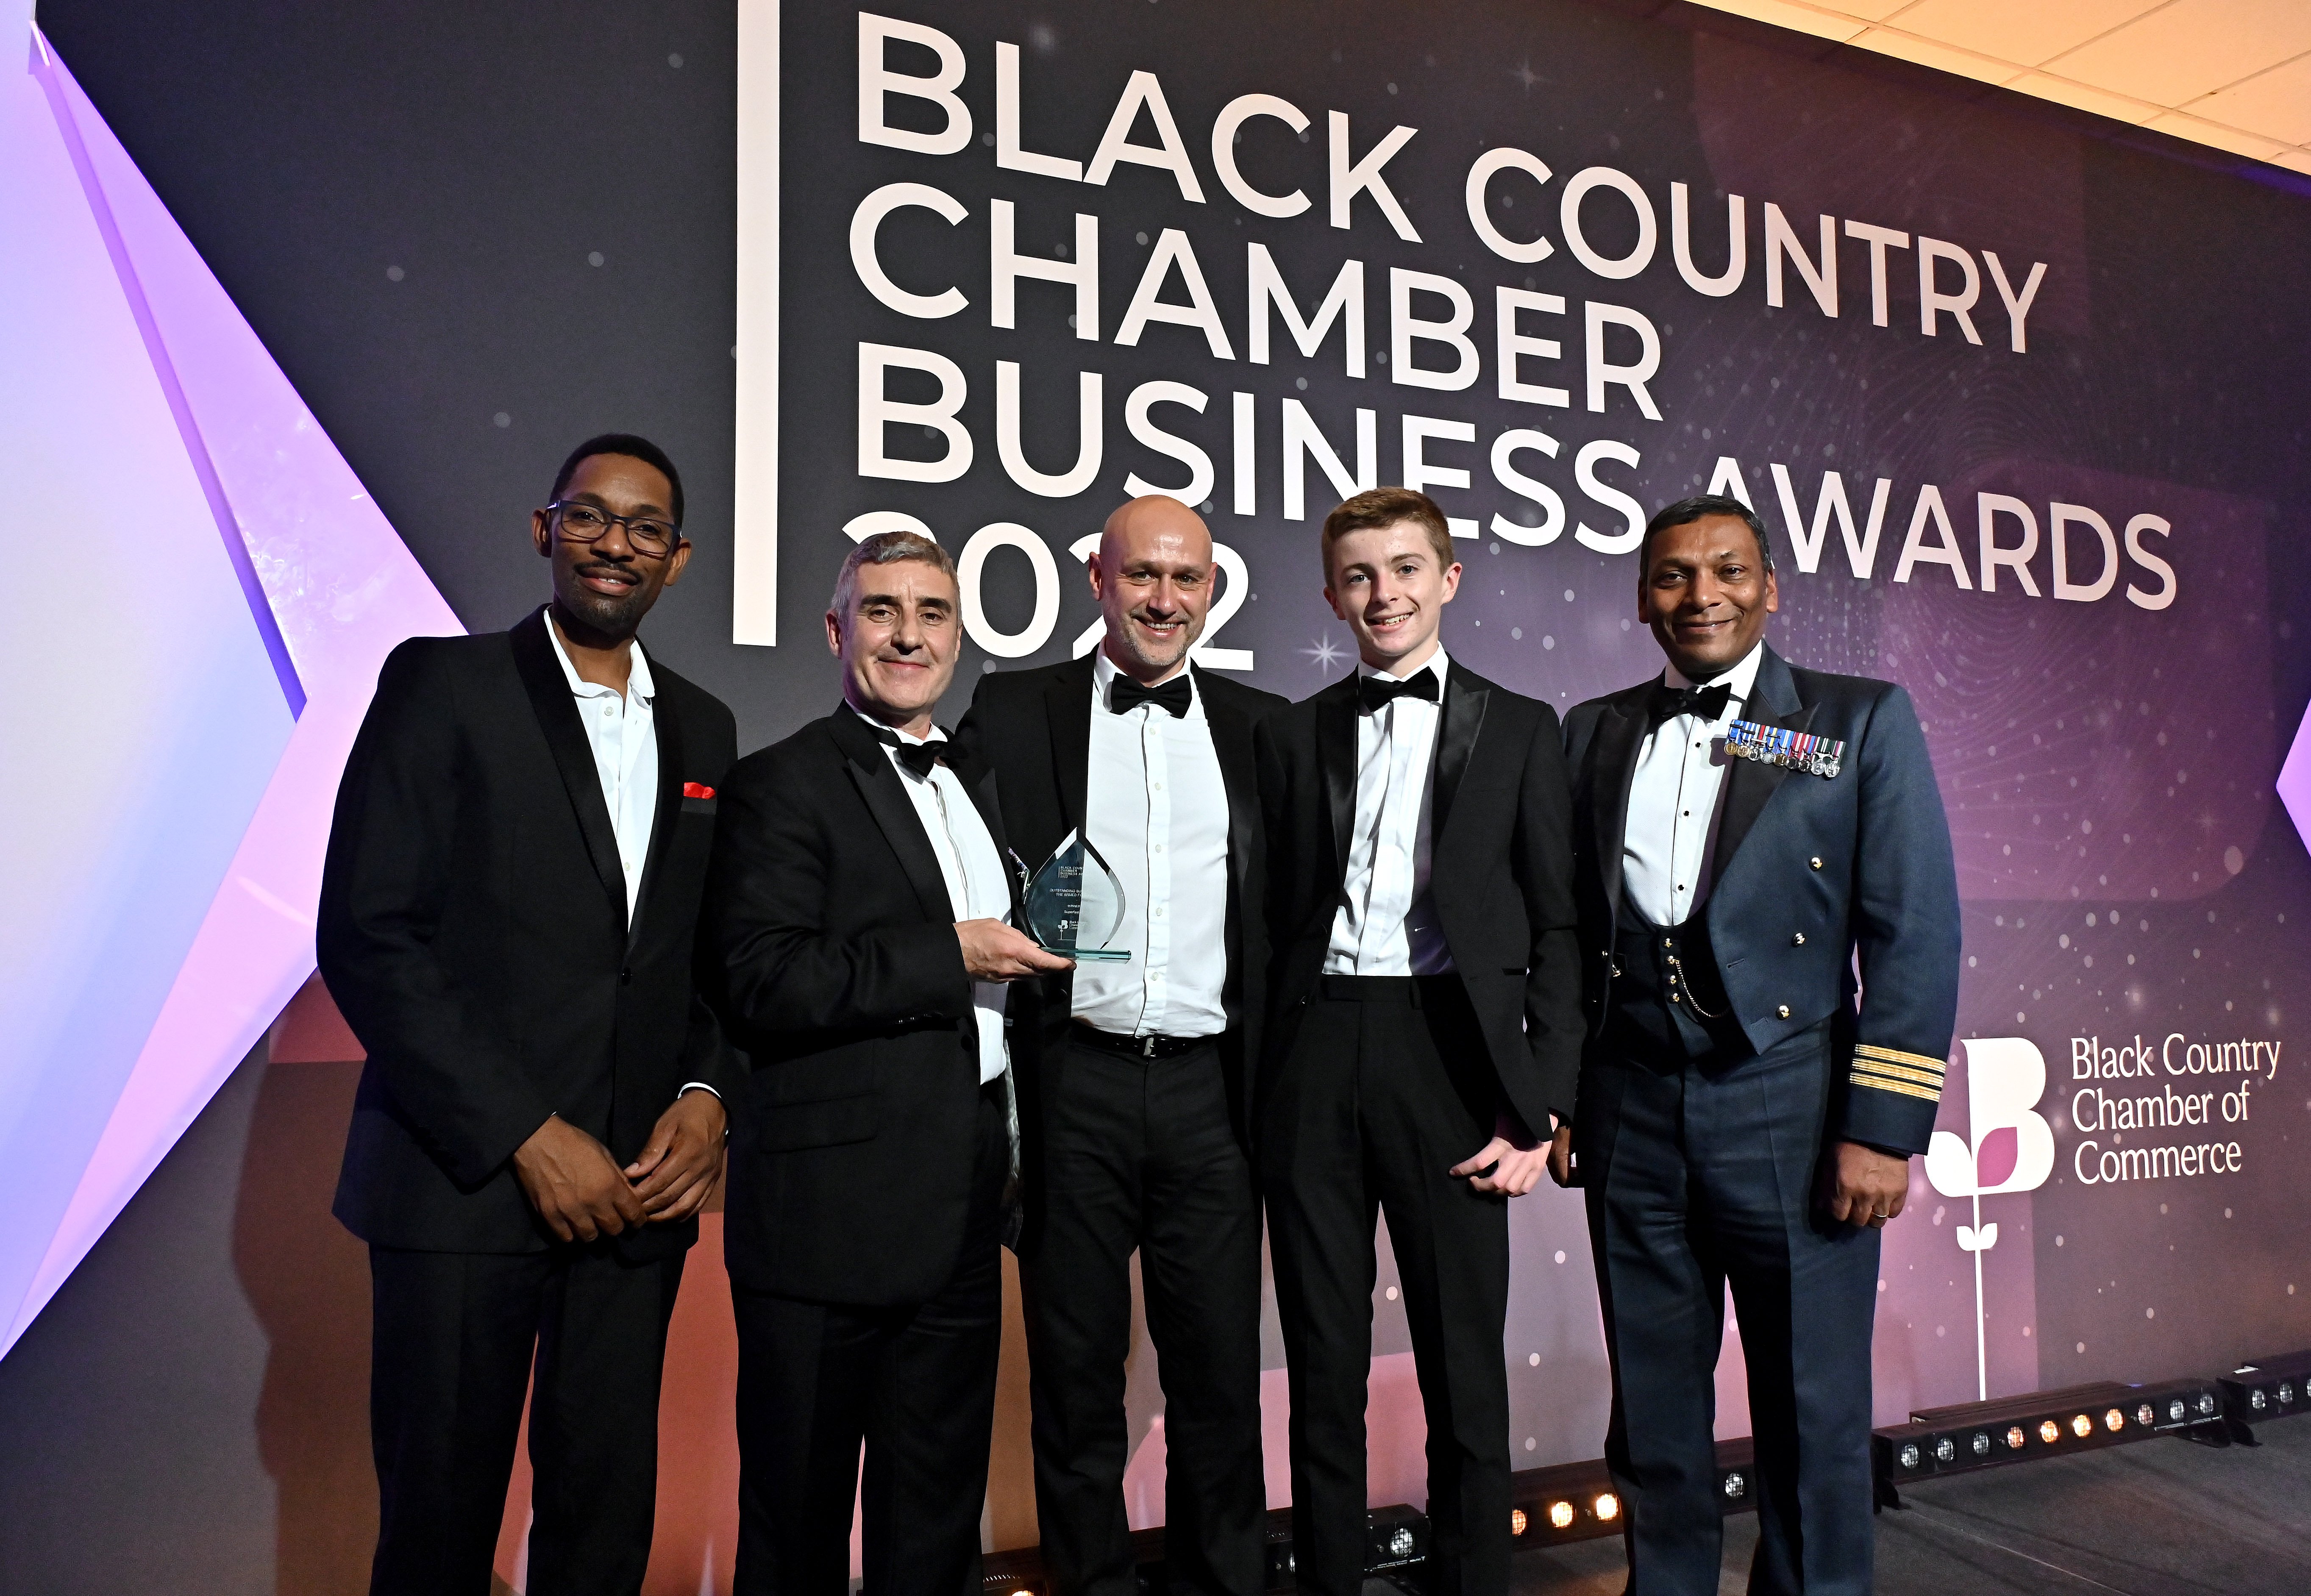 Superfast IT Recognised at Black Country Chamber Awards